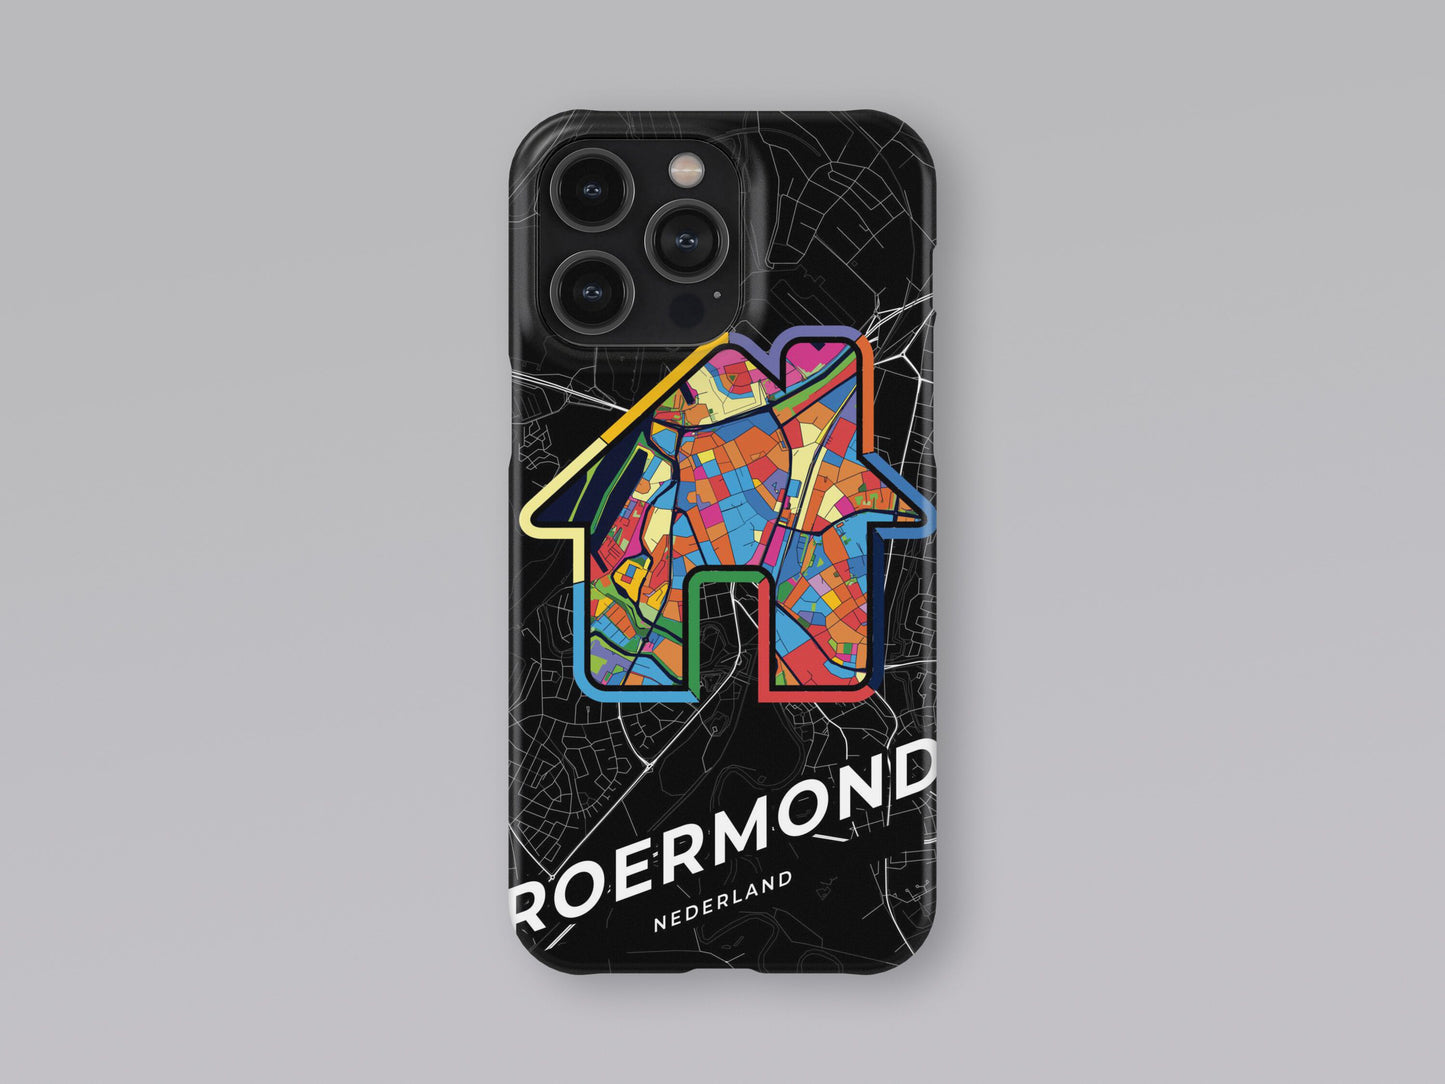 Roermond Netherlands slim phone case with colorful icon. Birthday, wedding or housewarming gift. Couple match cases. 3